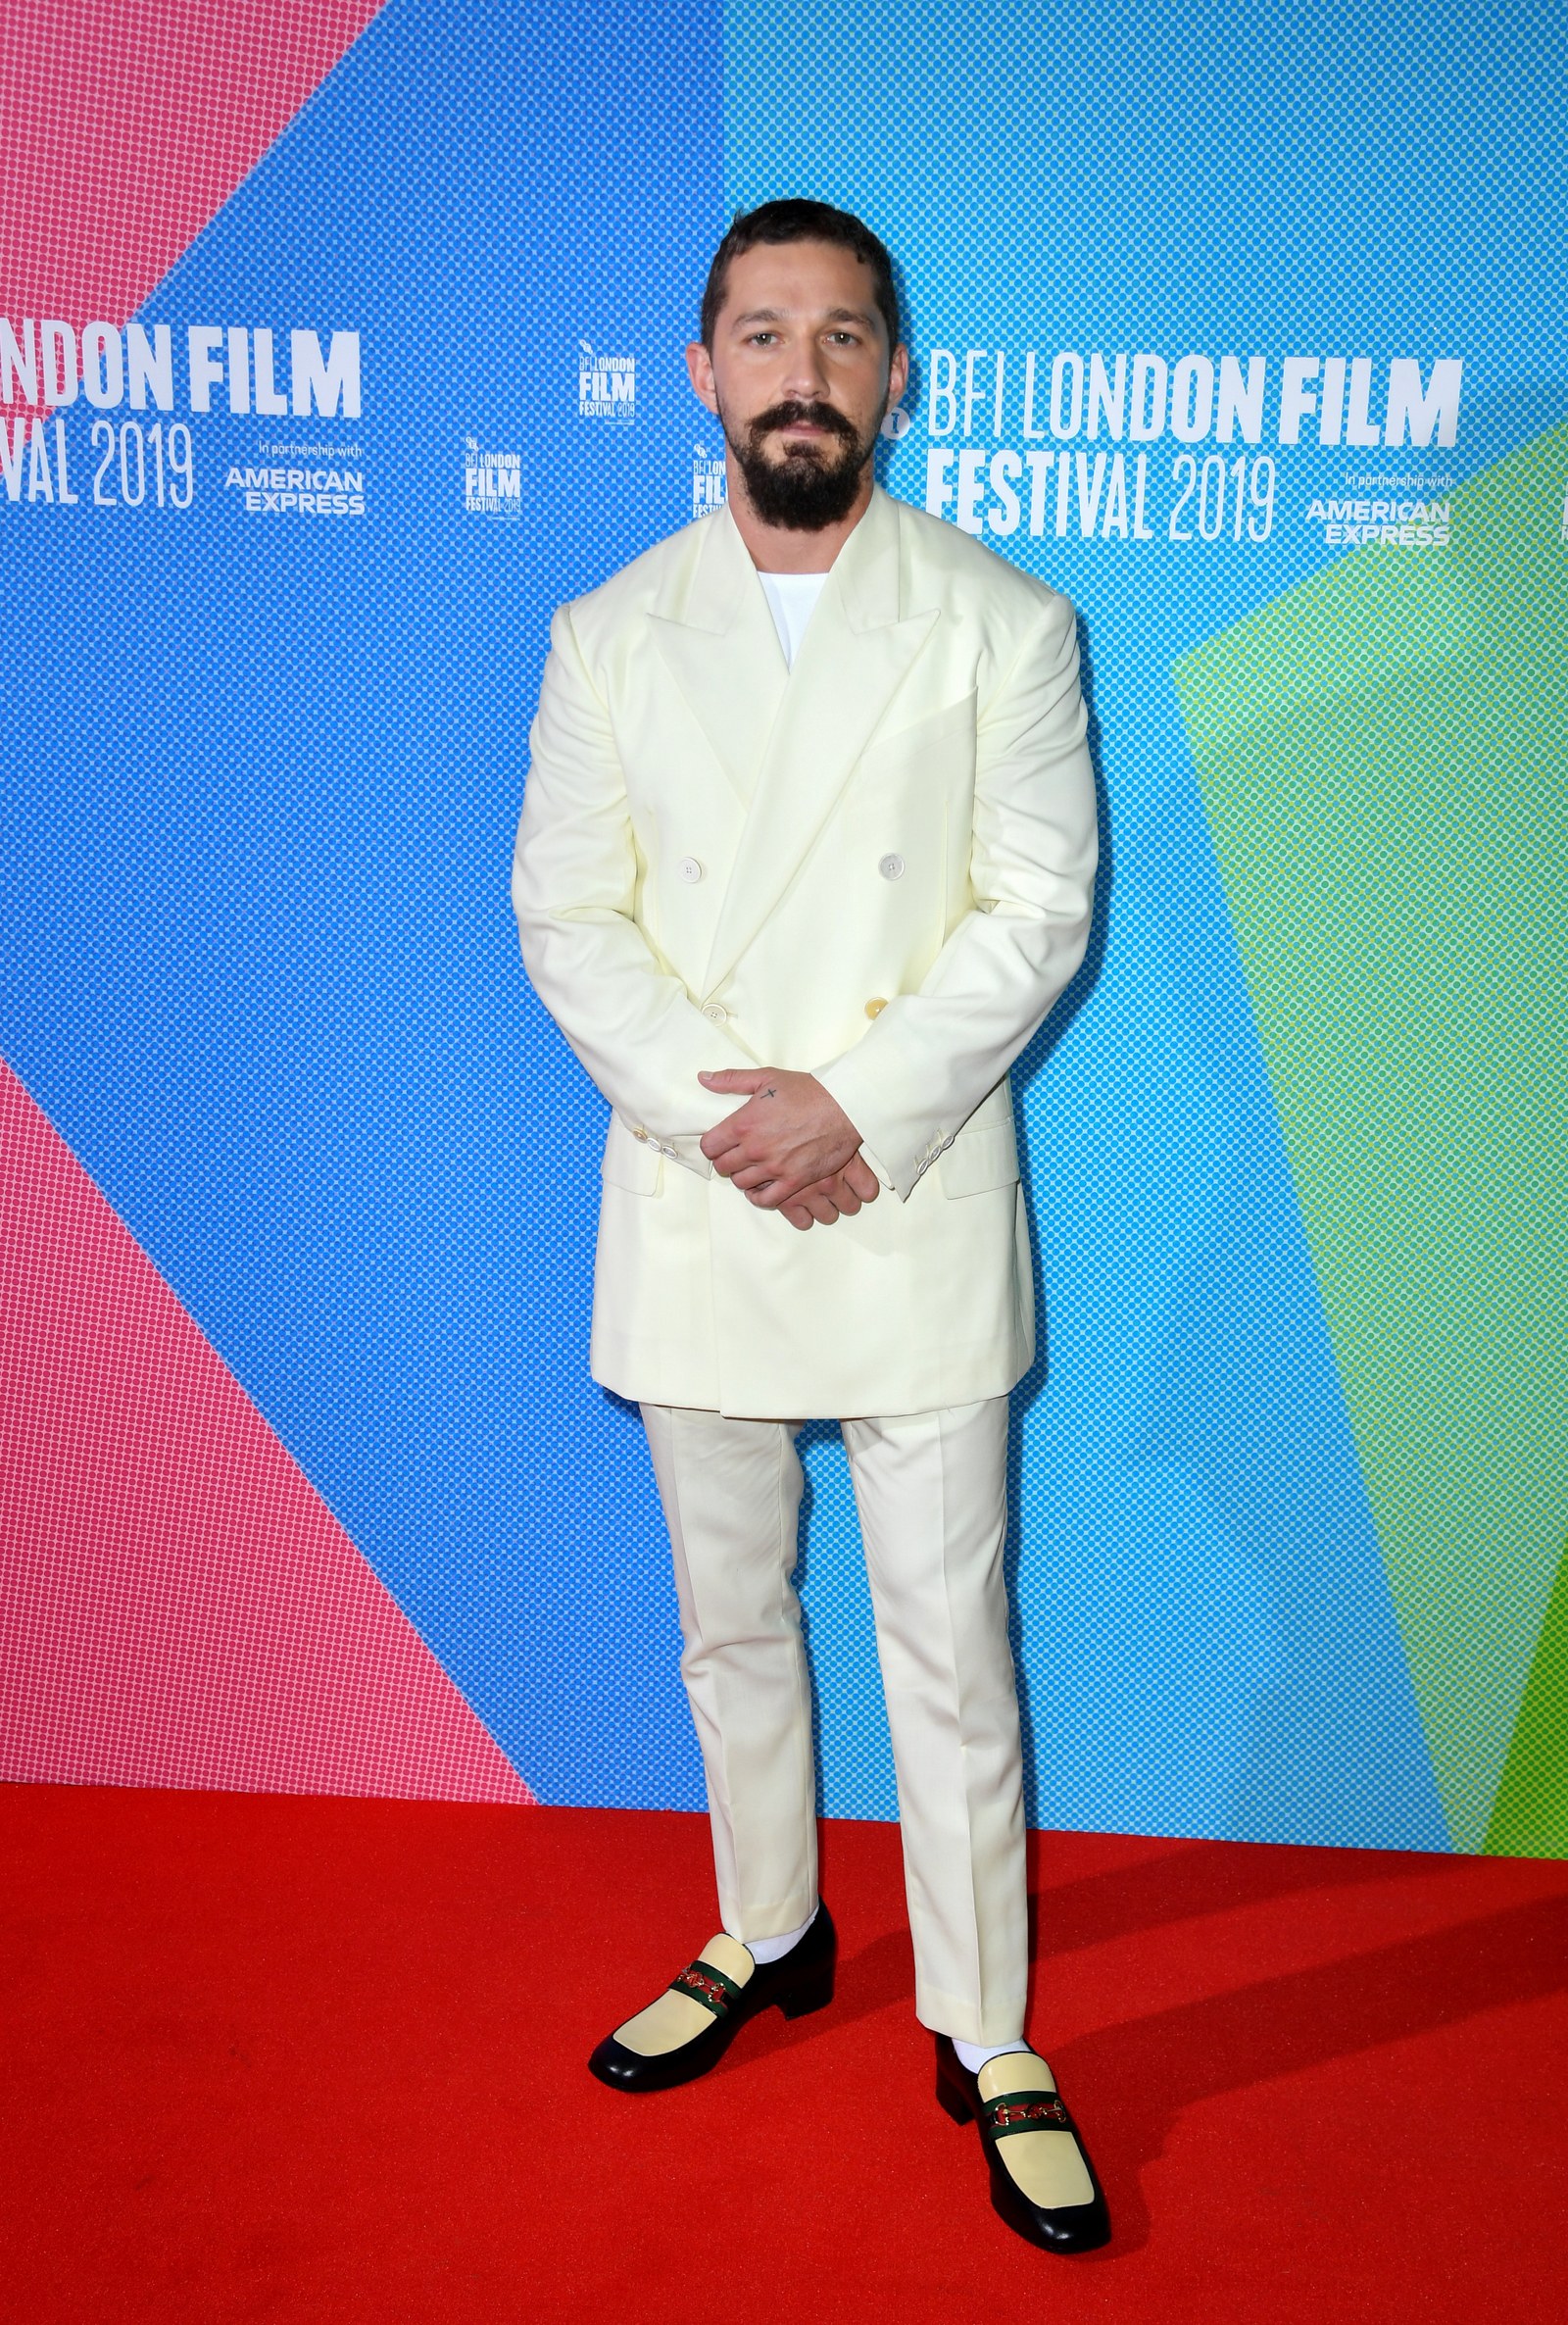 Shia LaBeouf Is the Latest Man to Rock Heels